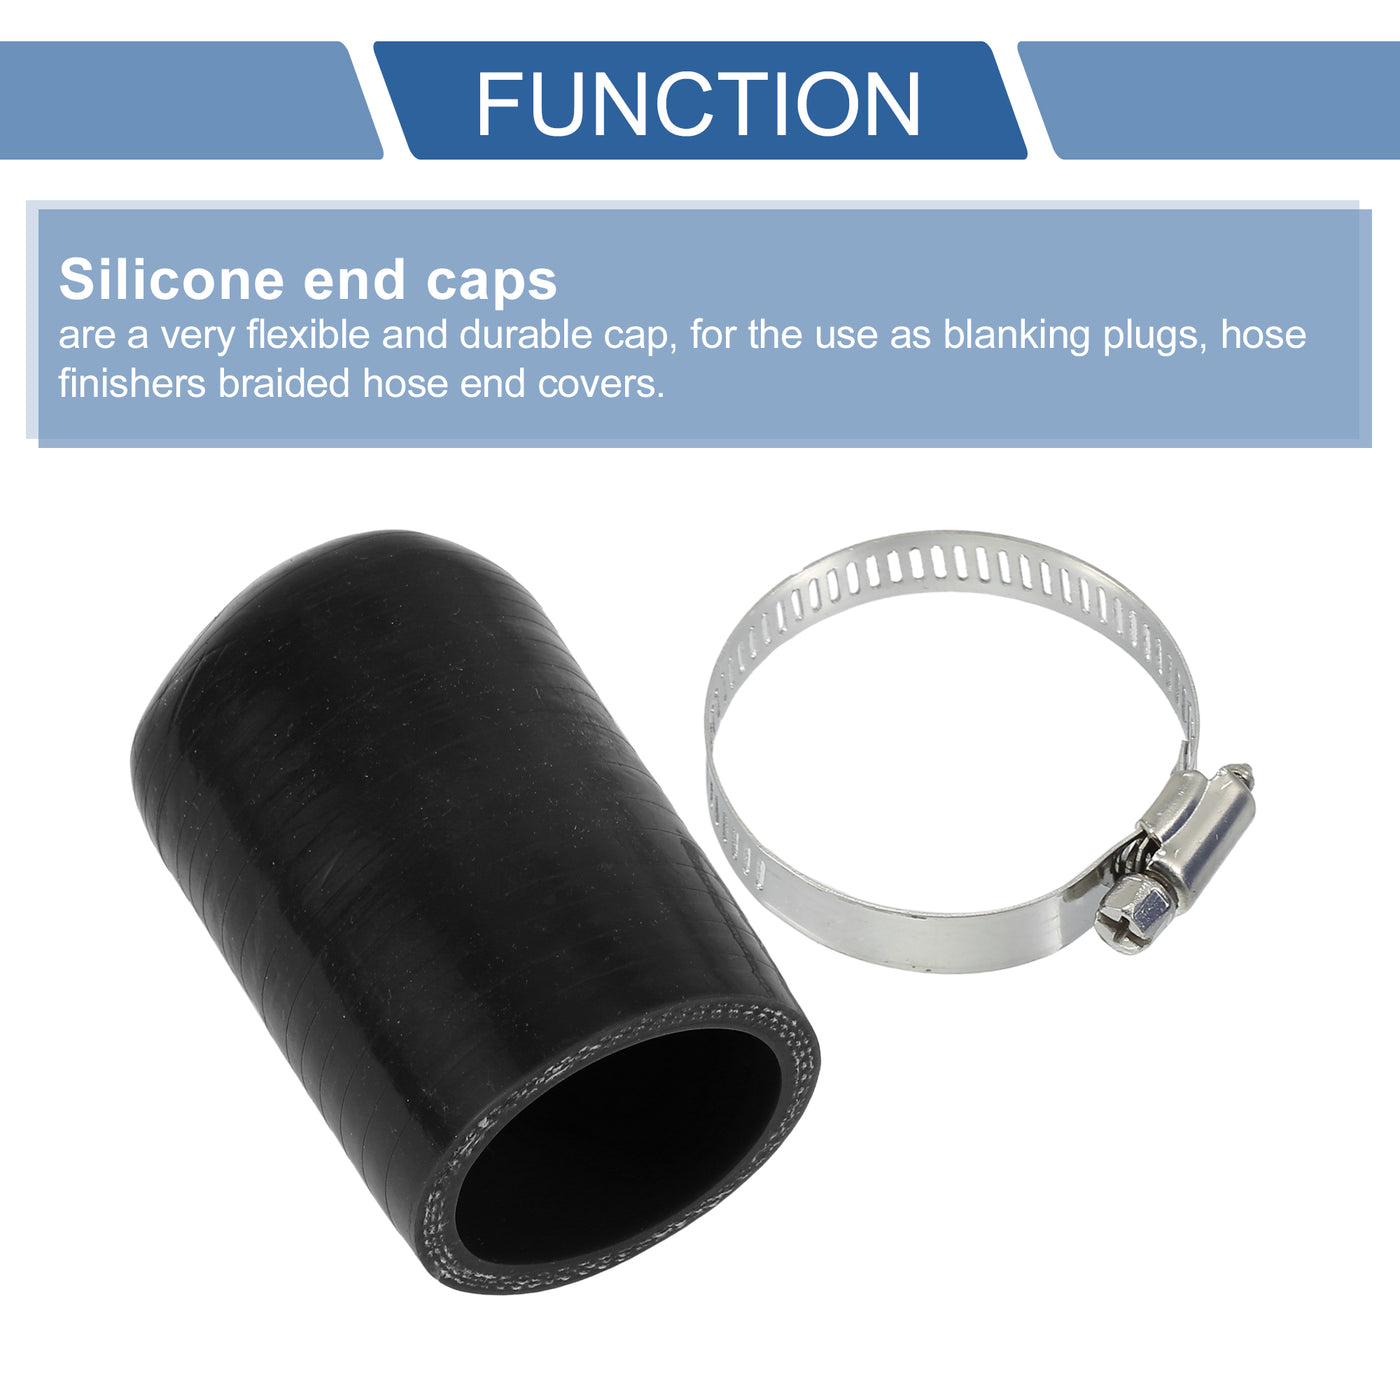 X AUTOHAUX 1 Pcs 60mm Length 40mm/1.57" ID Black Car Silicone Rubber Hose End Cap with Clamp Silicone Reinforced Blanking Cap for Bypass Tube Universal